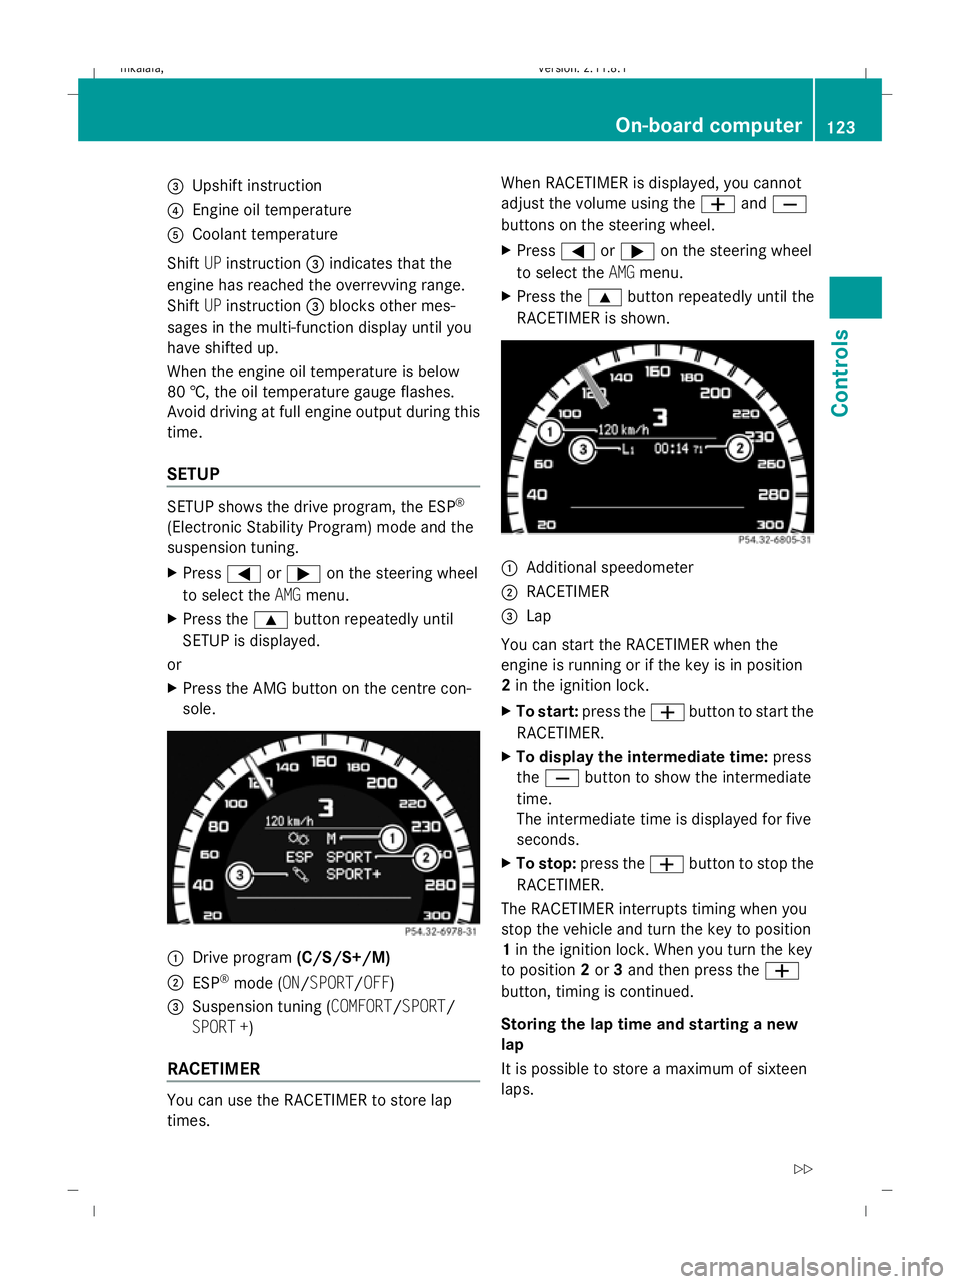 MERCEDES-BENZ E-CLASS SALOON 2009  Owners Manual =
Upshift instruction
? Engine oil temperature
A Coolant temperature
Shift UPinstruction =indicates that the
engine has reached the overrevving range.
Shift UPinstruction =blocks other mes-
sages in t